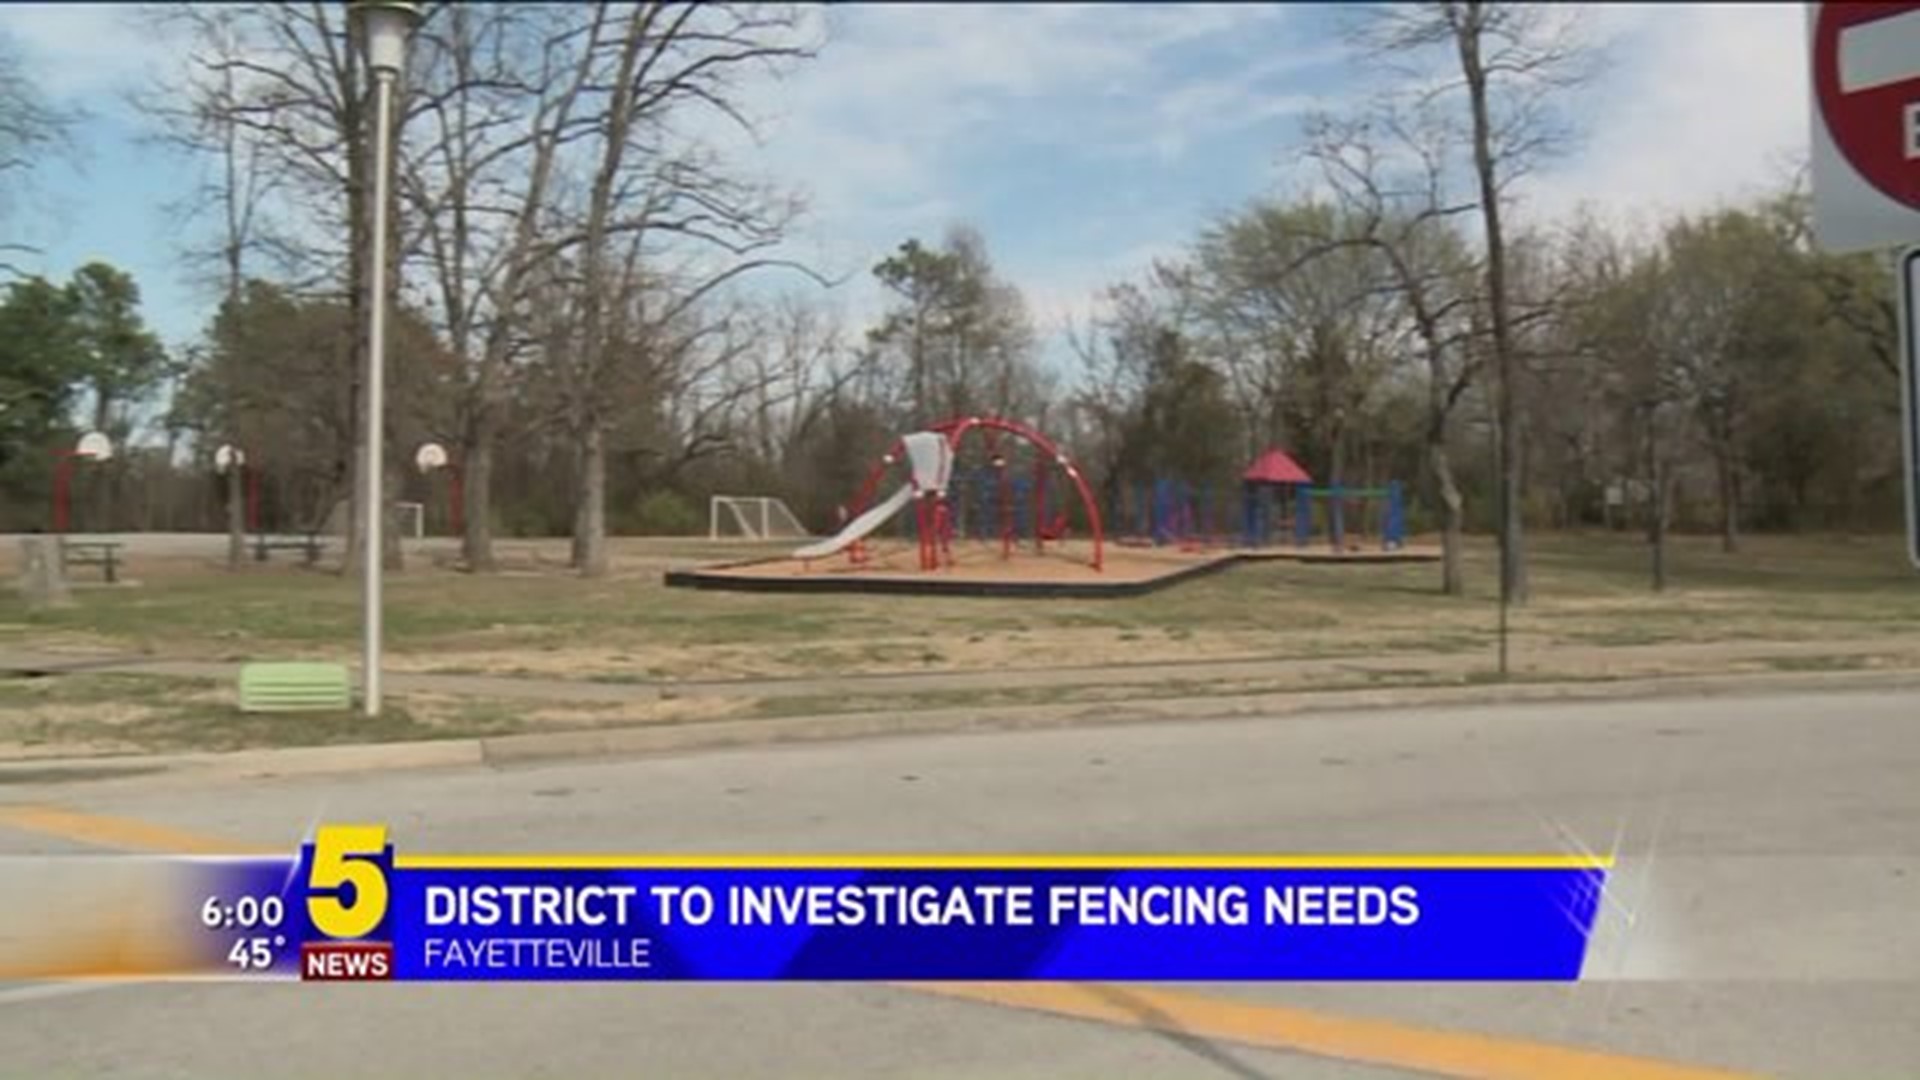 District To Investigate Fencing Needs